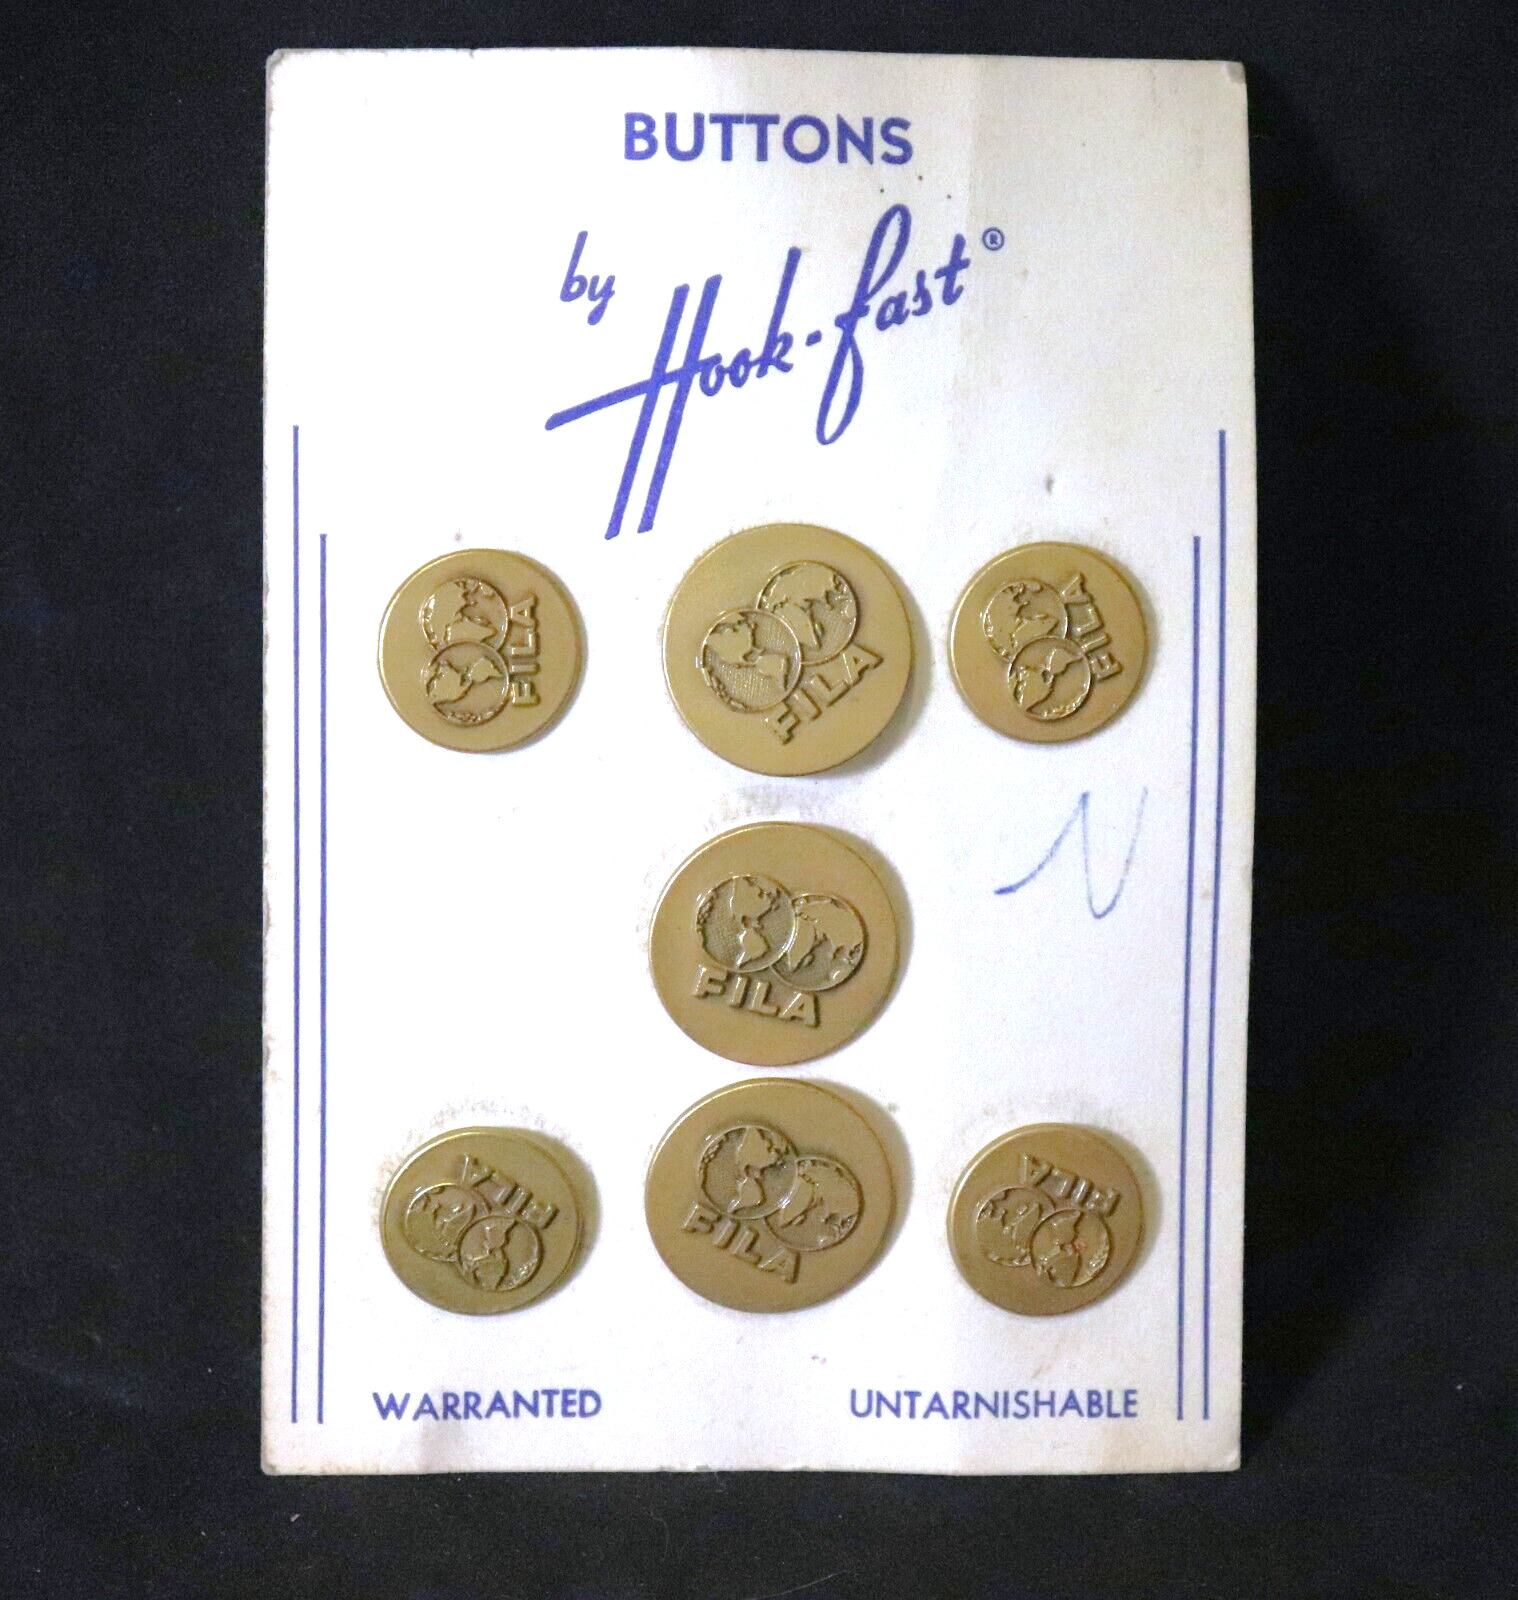 Vintage 1930s Fila Brass Shank Buttons RARE Hook-Fast New on Card Set of 7